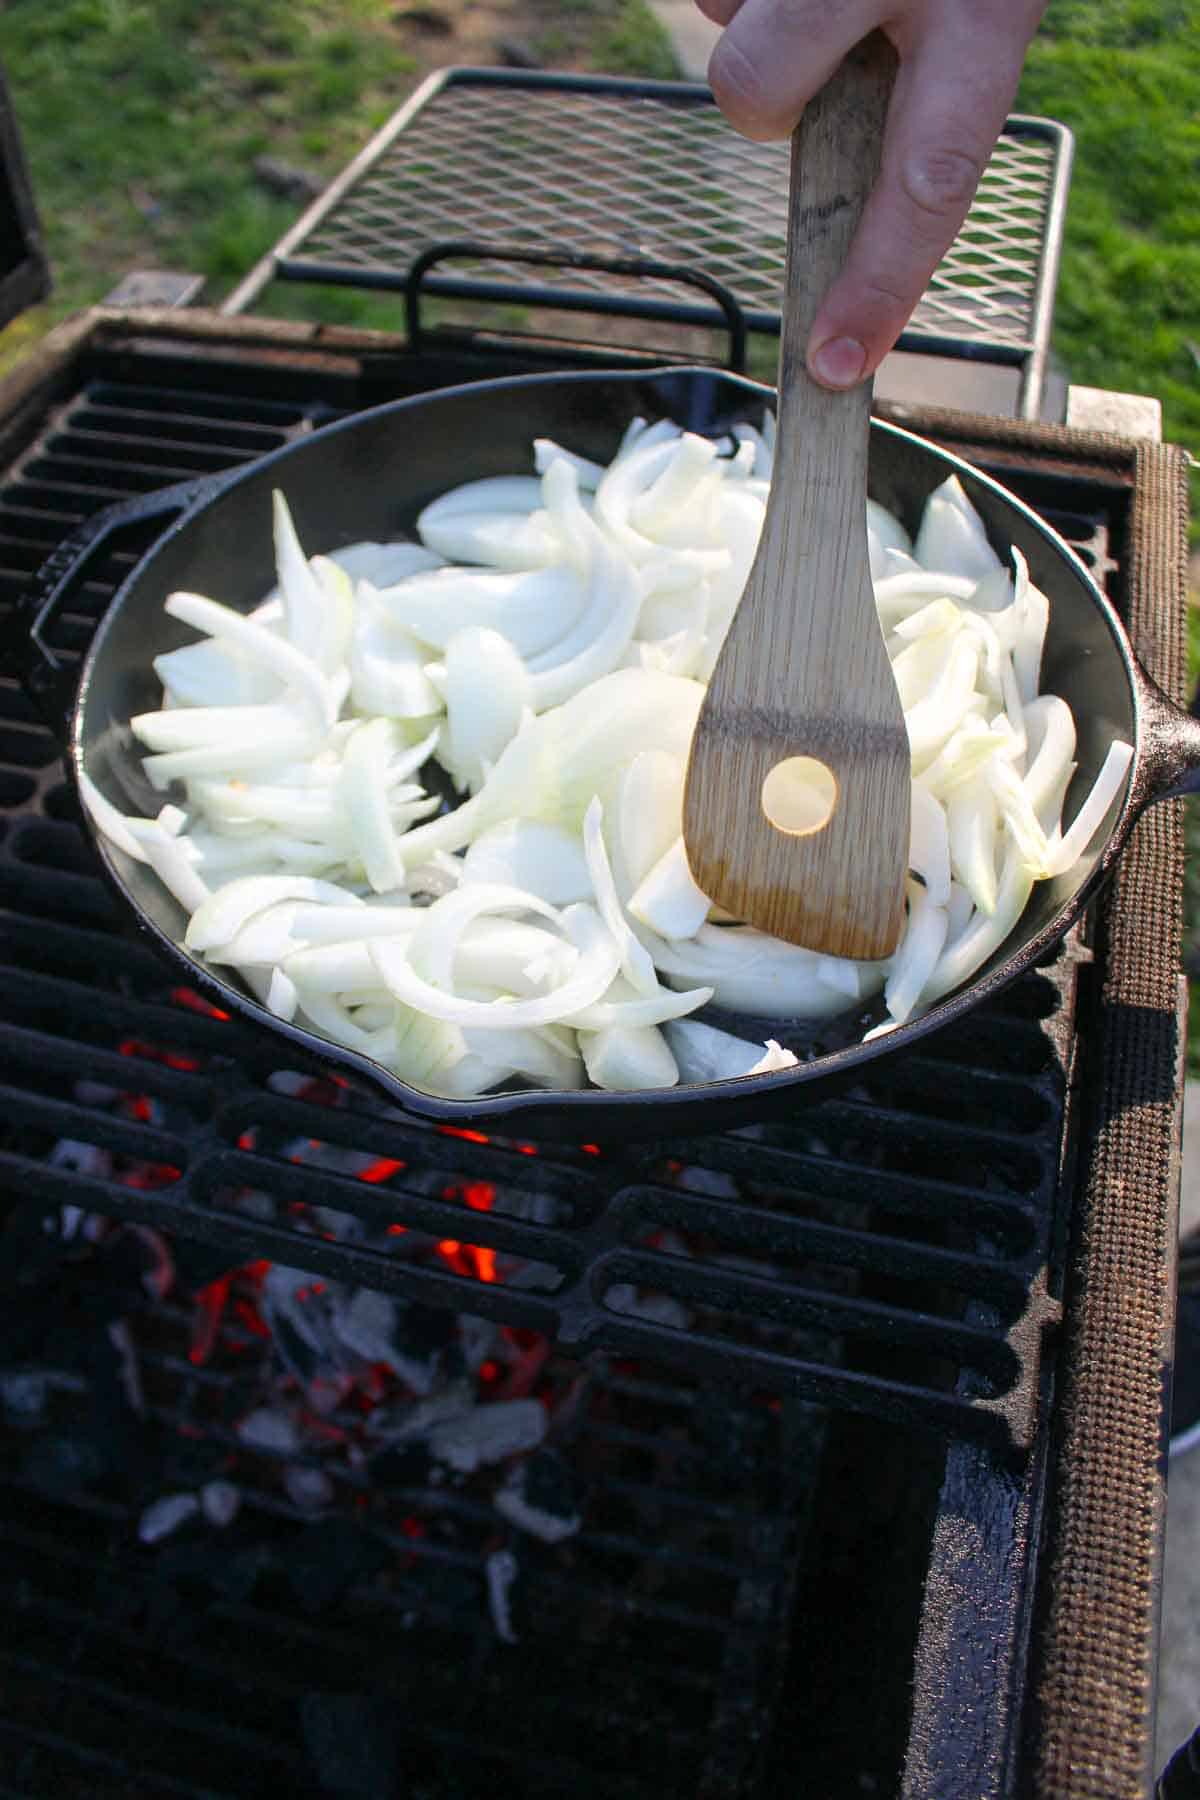 The raw onions starting to sauté over the coals.